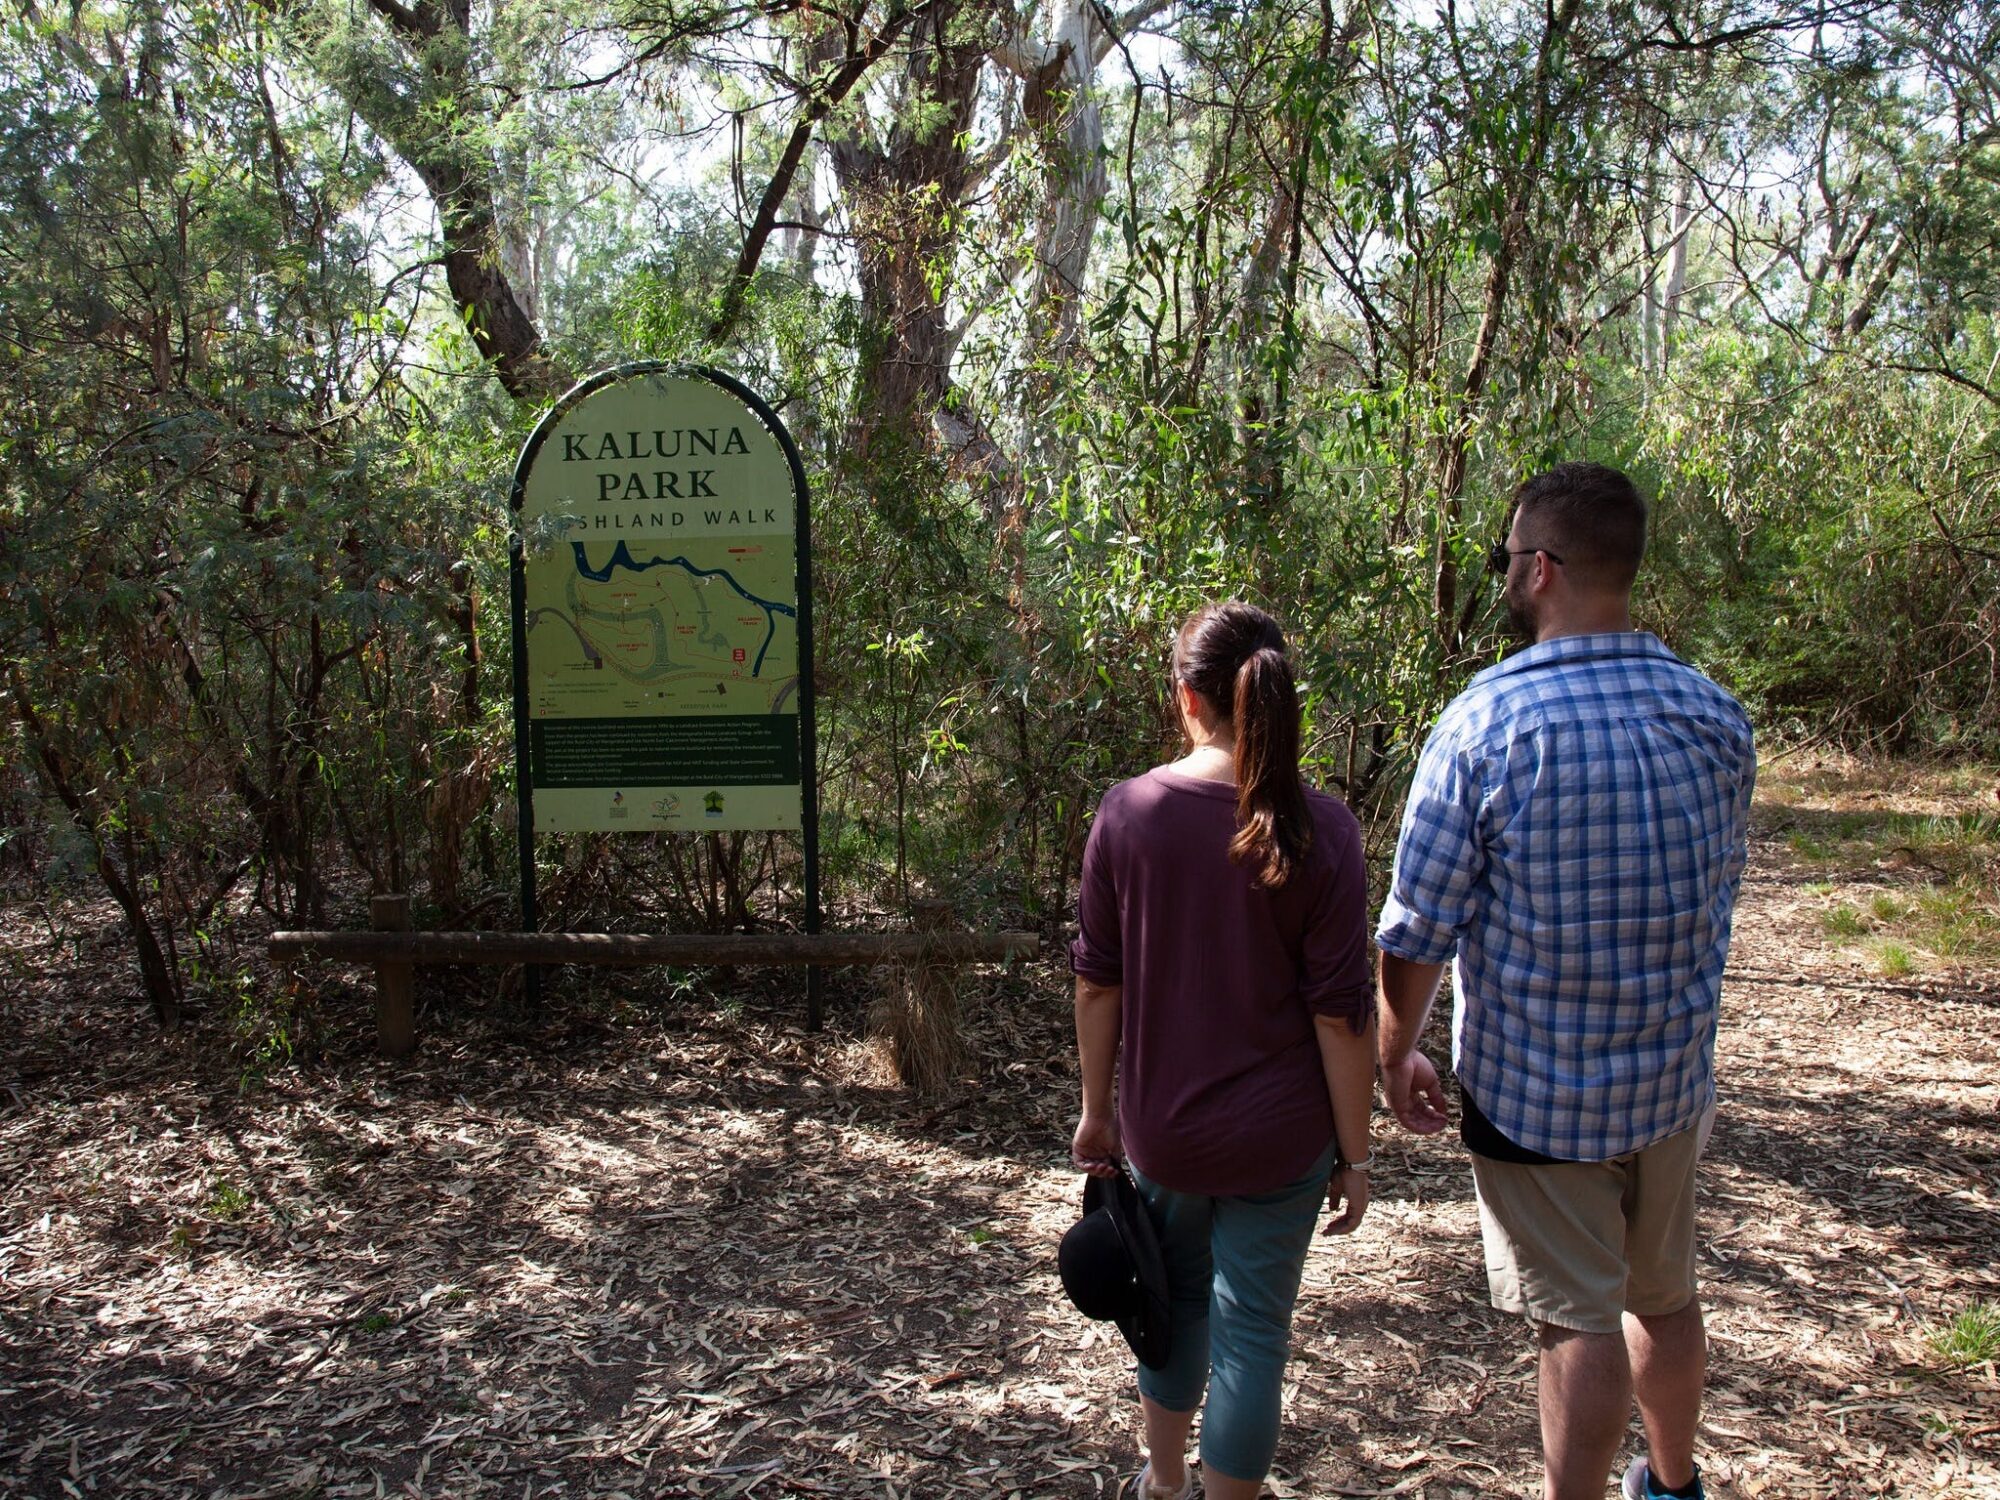 path, interpretive signage, map of walks, trees, native plants, people looking at sign